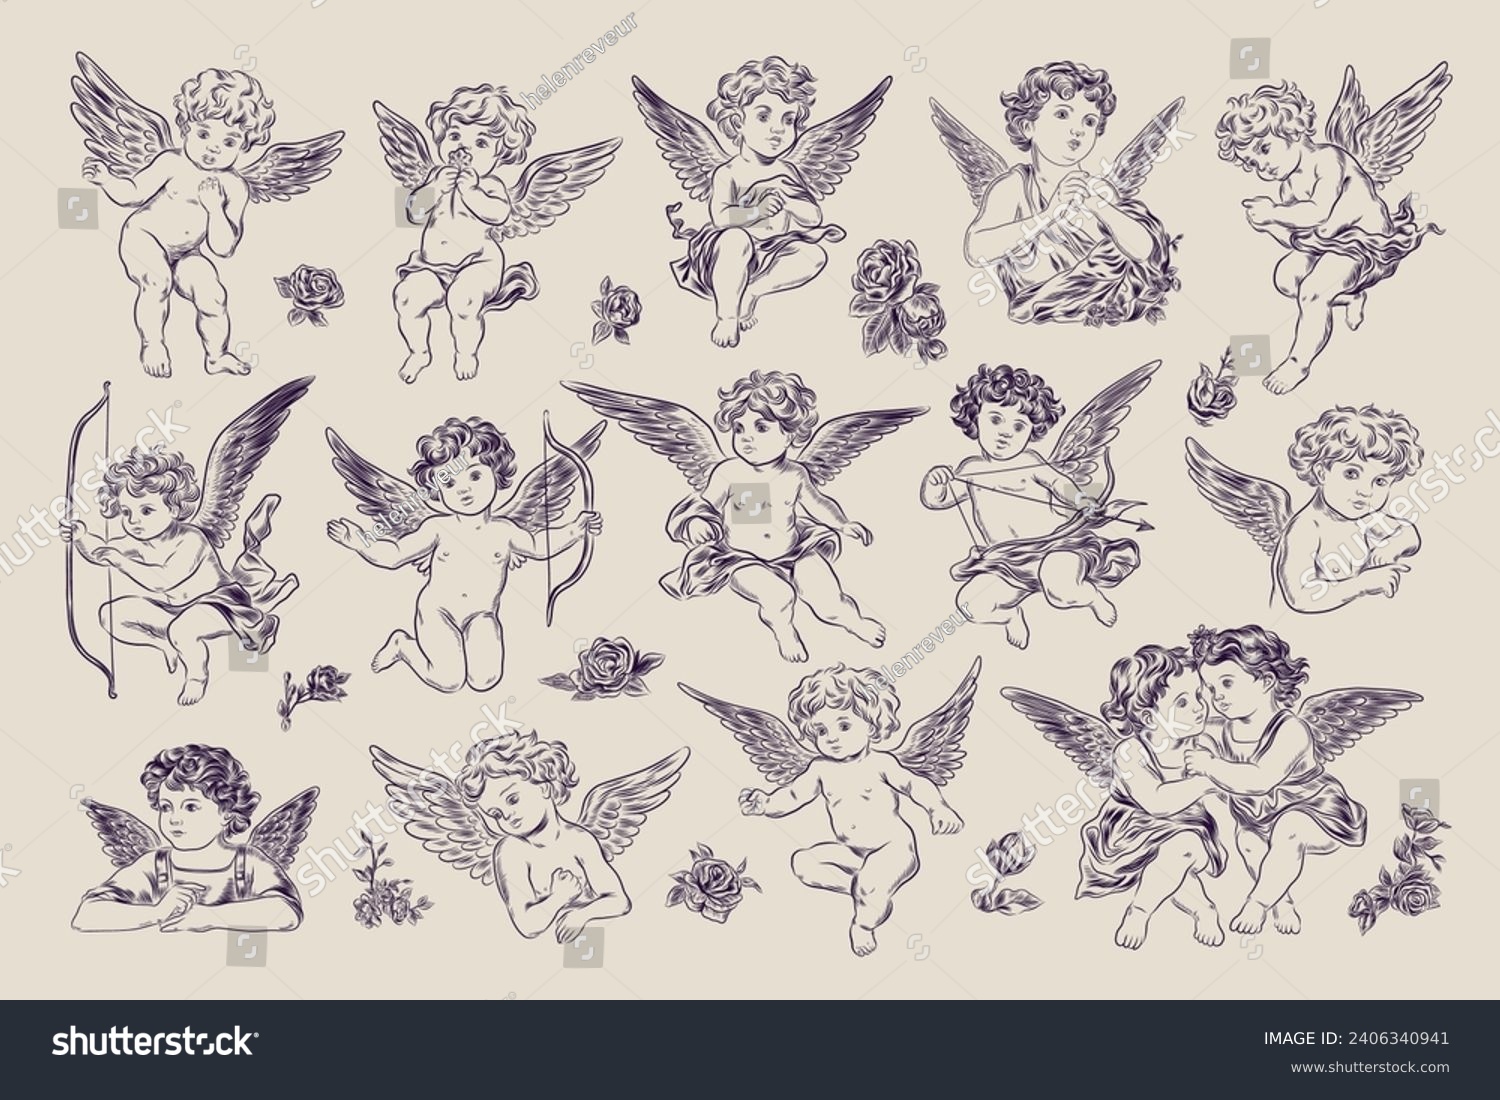 SVG of Vintage Valentine's day cupids or little angels collection. Engraving style retro set svg